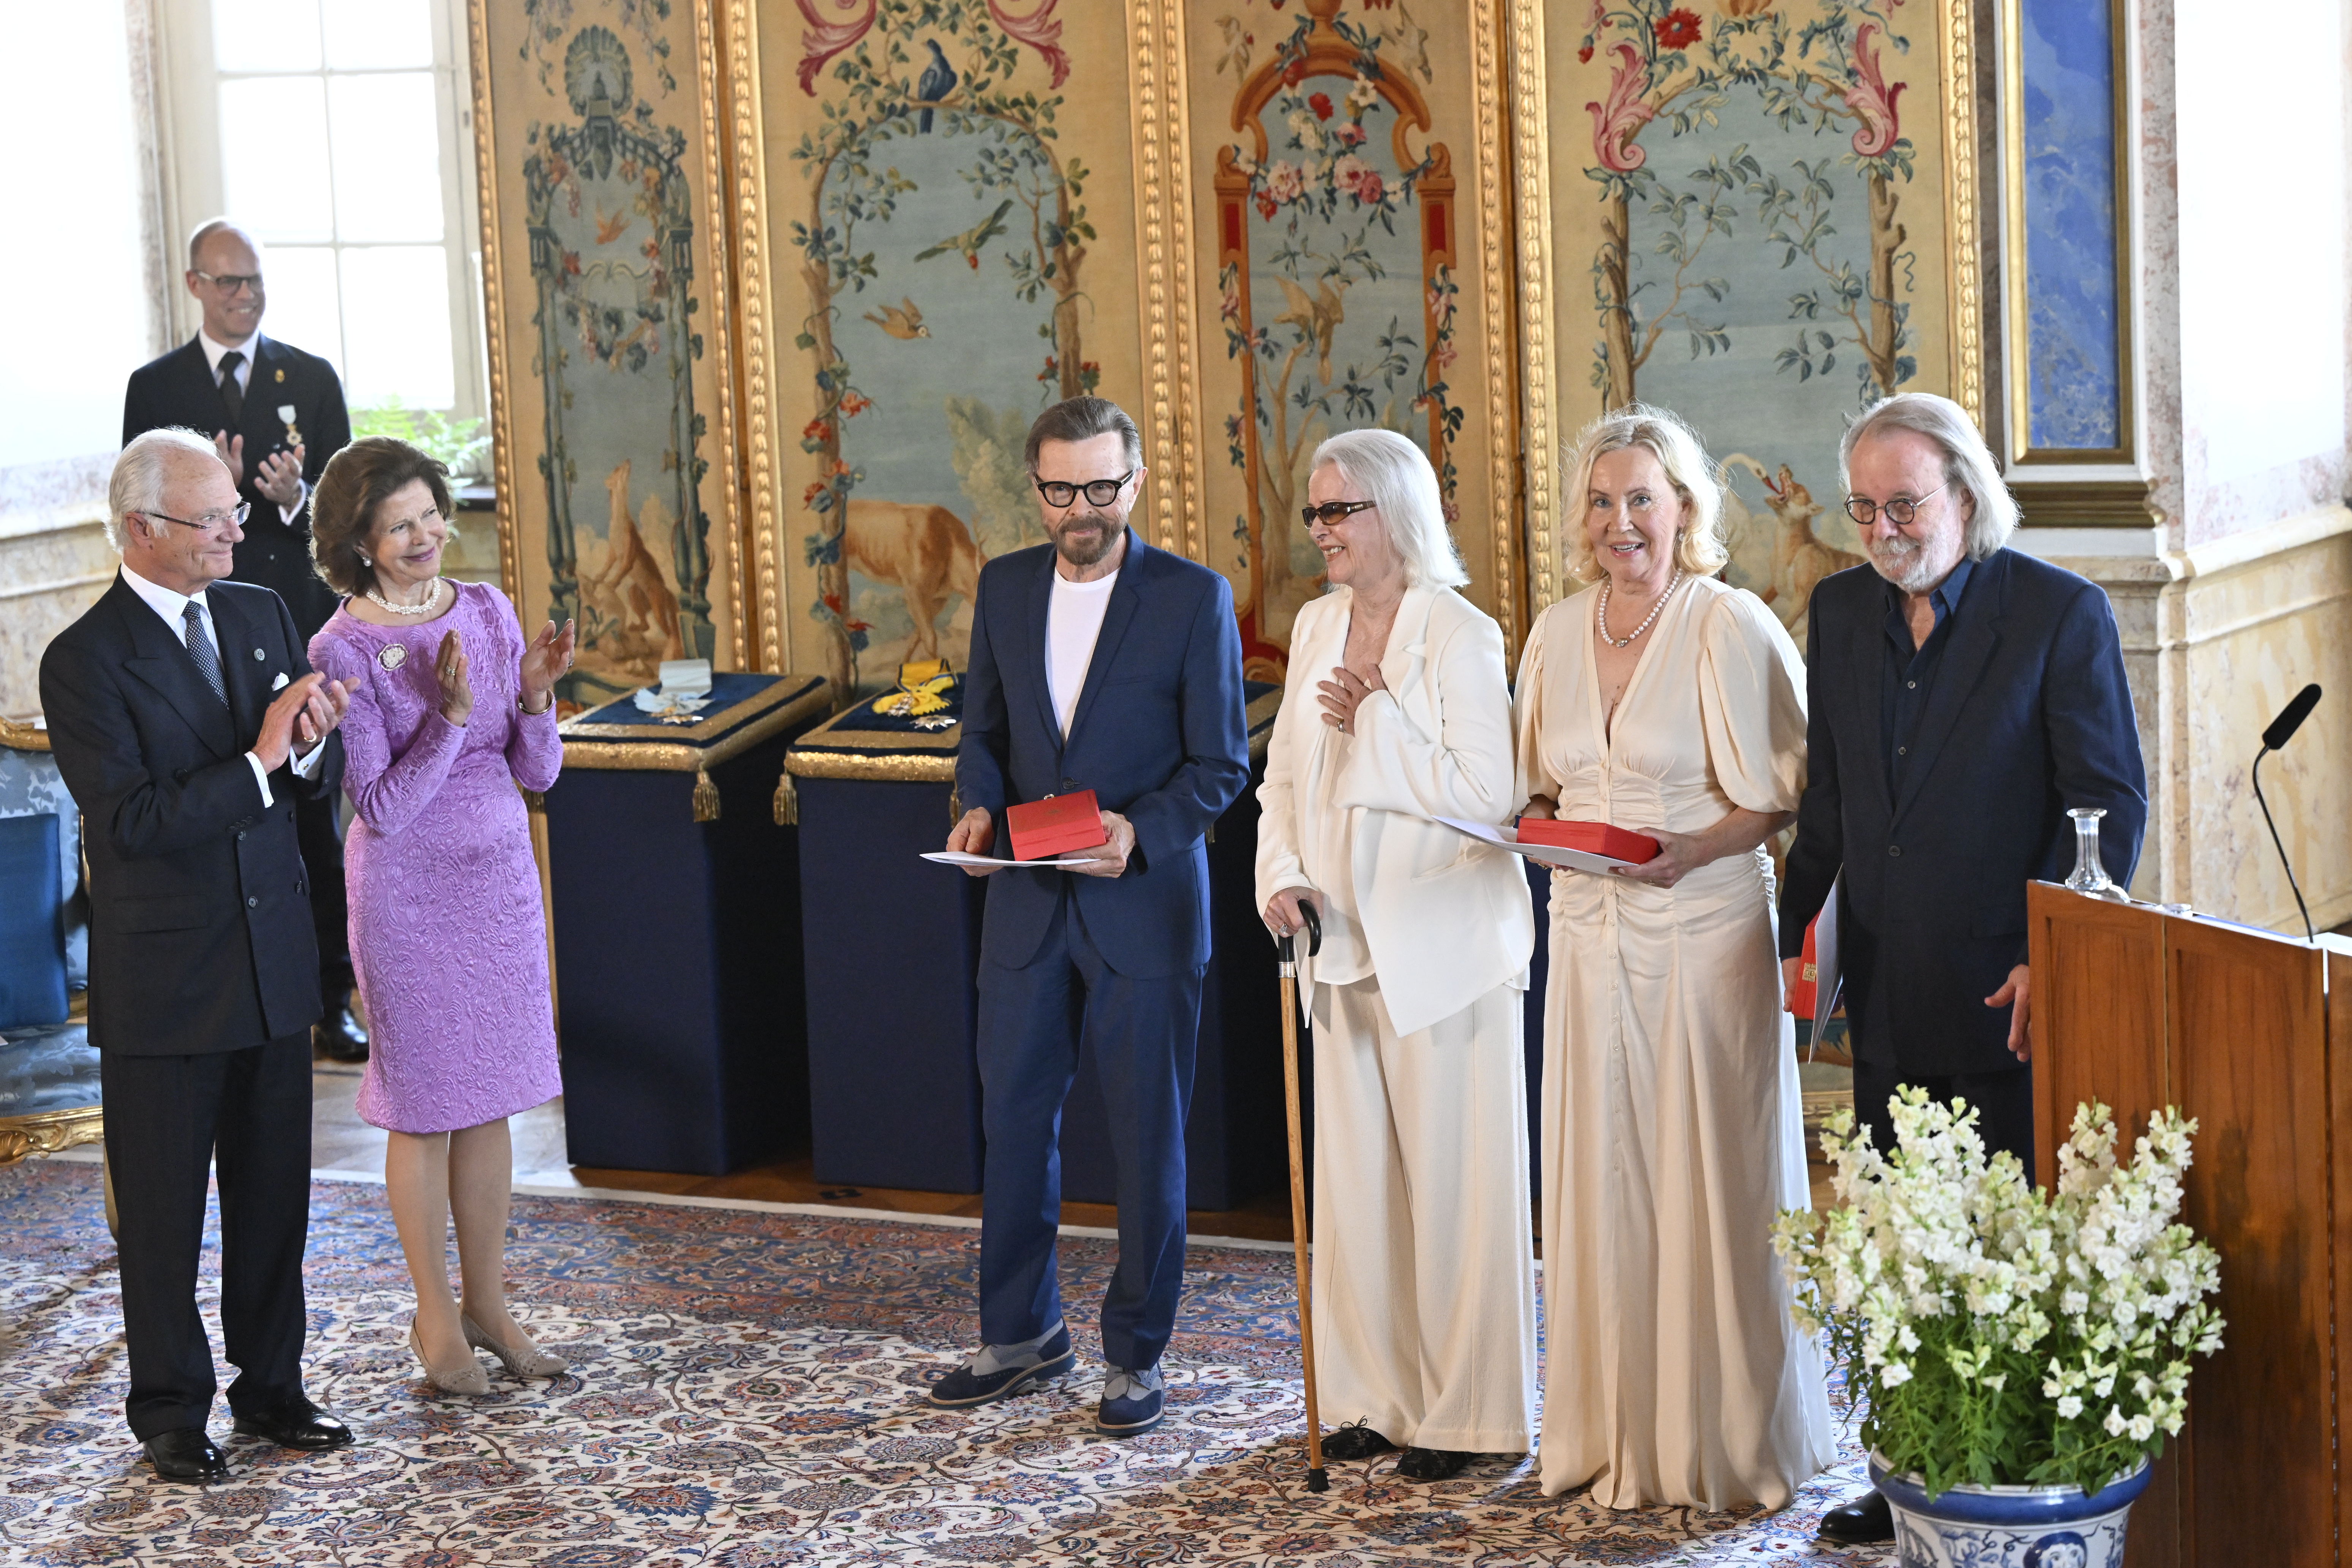 King Carl XIV Gustaf and Queen Silvia presented the group with the Order of the Vasa - an extremely rare award